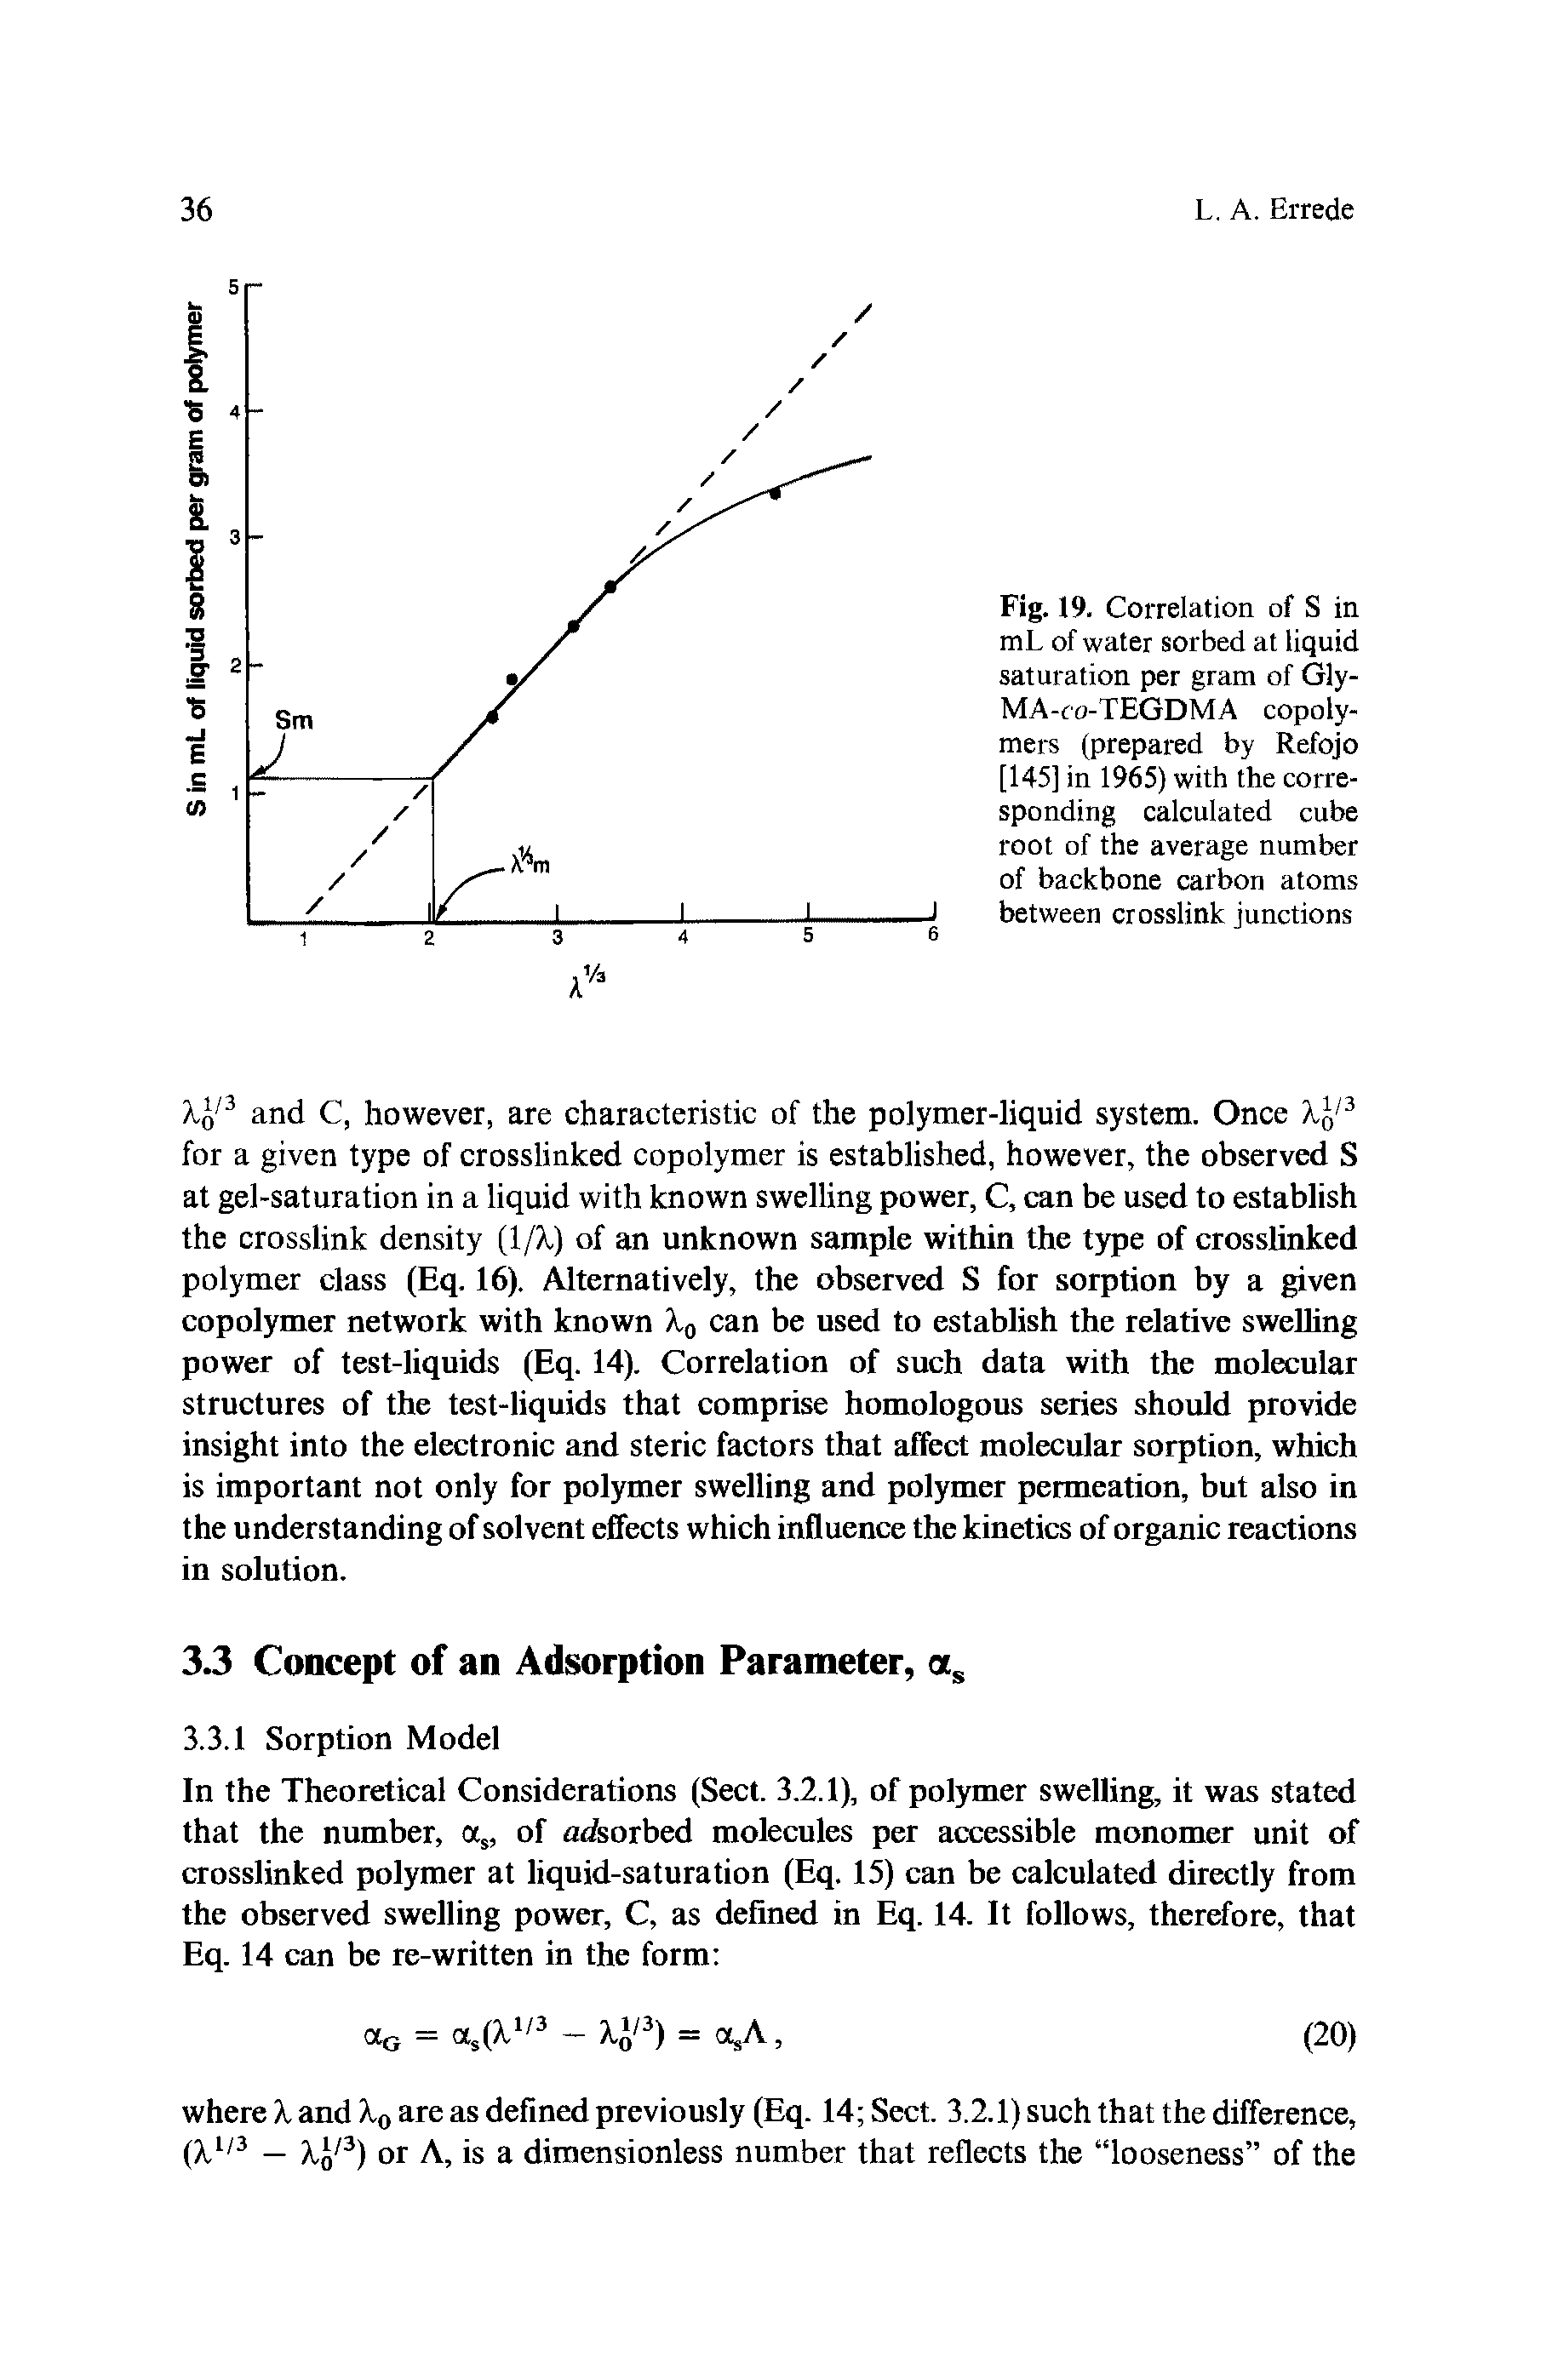 Fig. 19. Correlation of S in mL of water sorbed at liquid saturation per gram of Gly-MA-co-TEGDMA copolymers (prepared by Refojo [145] in 1965) with the corresponding calculated cube root of the average number of backbone carbon atoms between crosslink junctions...